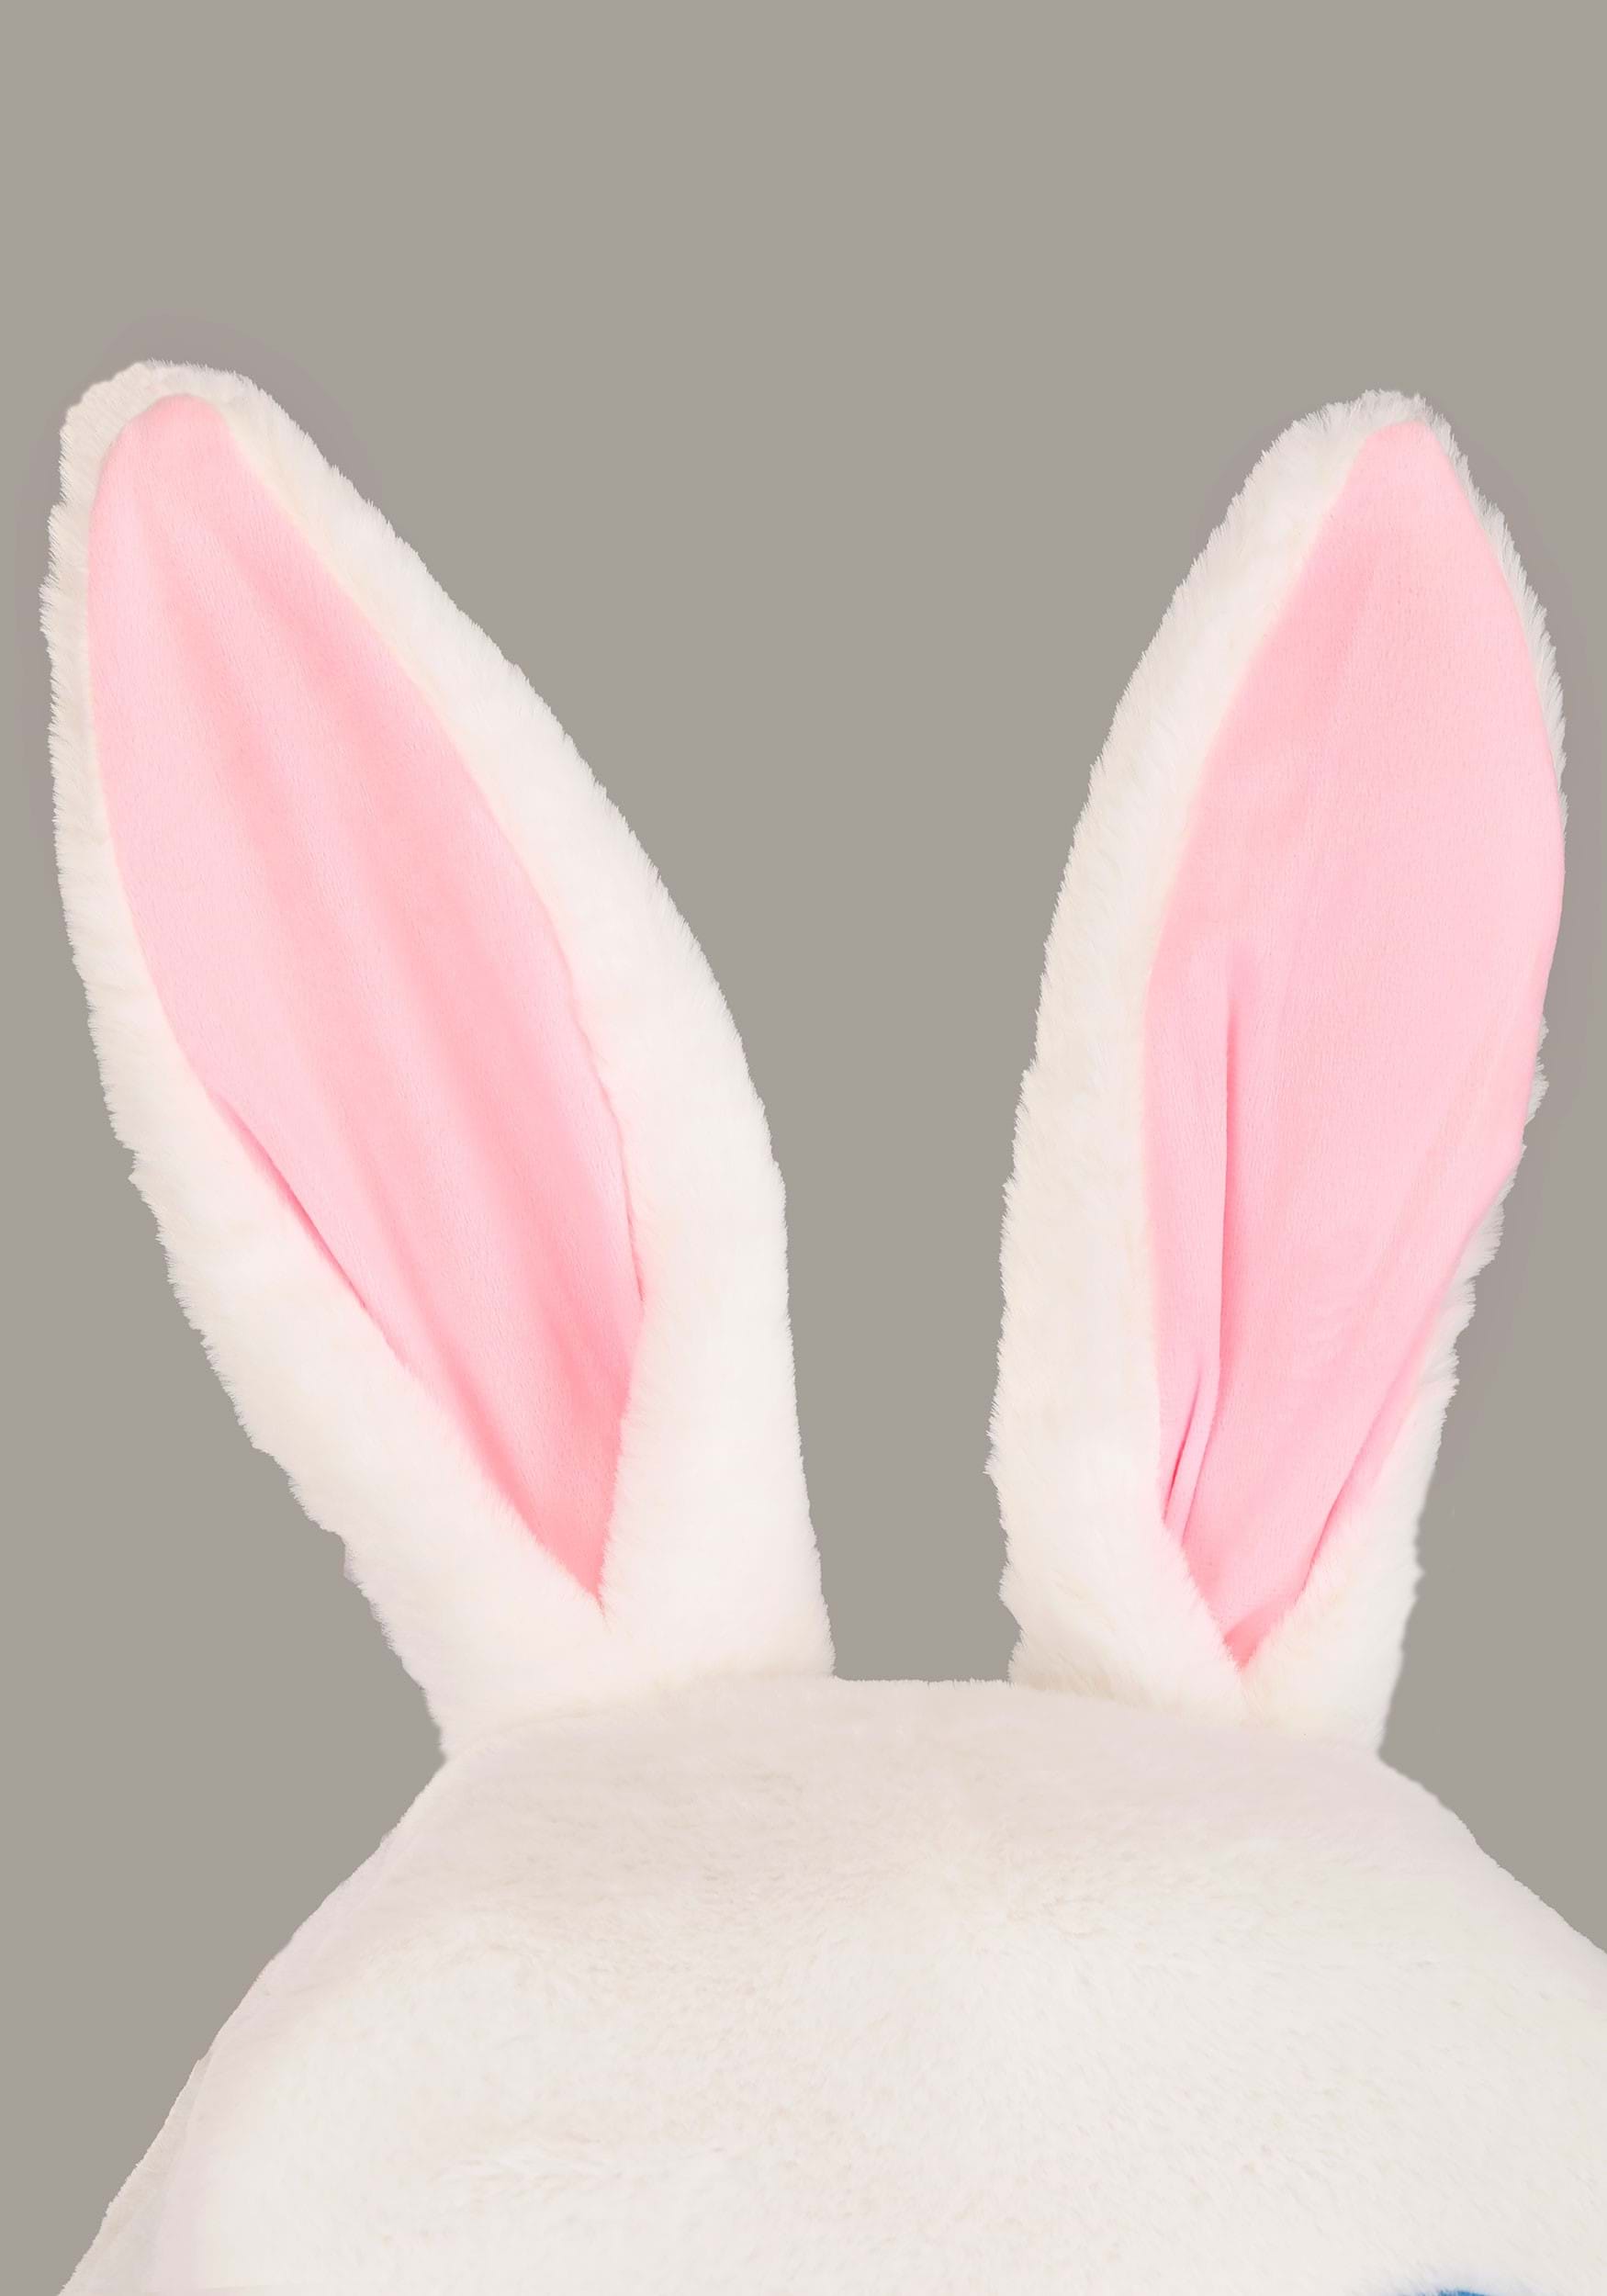 Mascot Easter Bunny Fancy Dress Costume For Adults